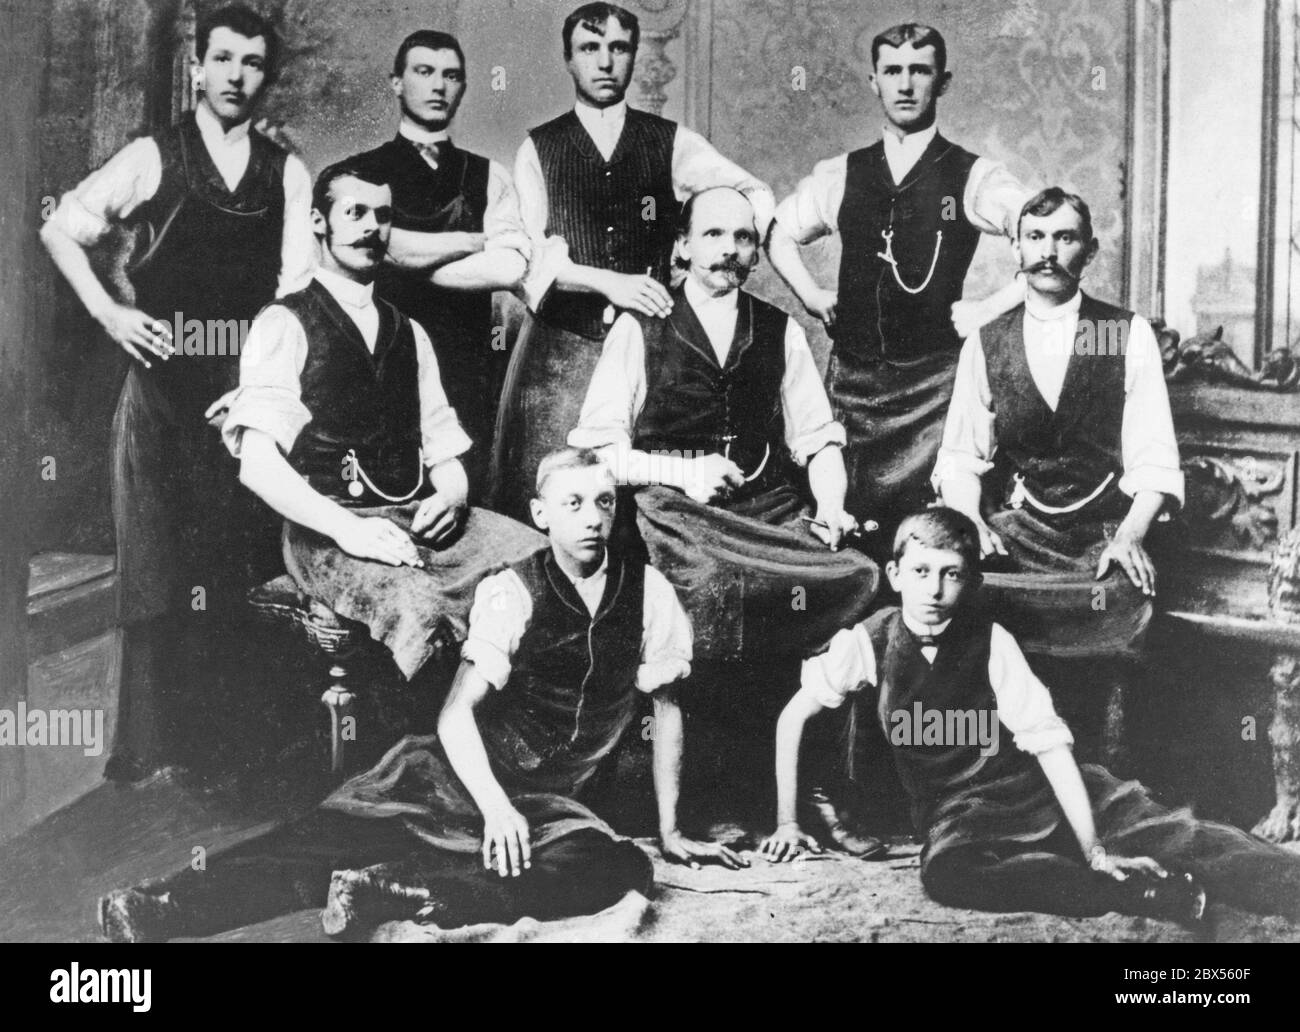 Group photo from the workshop of master tinsmith Anton Porsche in Maffersdorf rechts der Neisse. Right and left of the owner (centre) are the two senior journeymen, behind him are the journeymen and in front are the two apprentices, below them (right) the 14-year-old creator of the Volkswagen, who later became world-famous Professor Dr. Ing. h. c. Ferdinand Porsche. Stock Photo